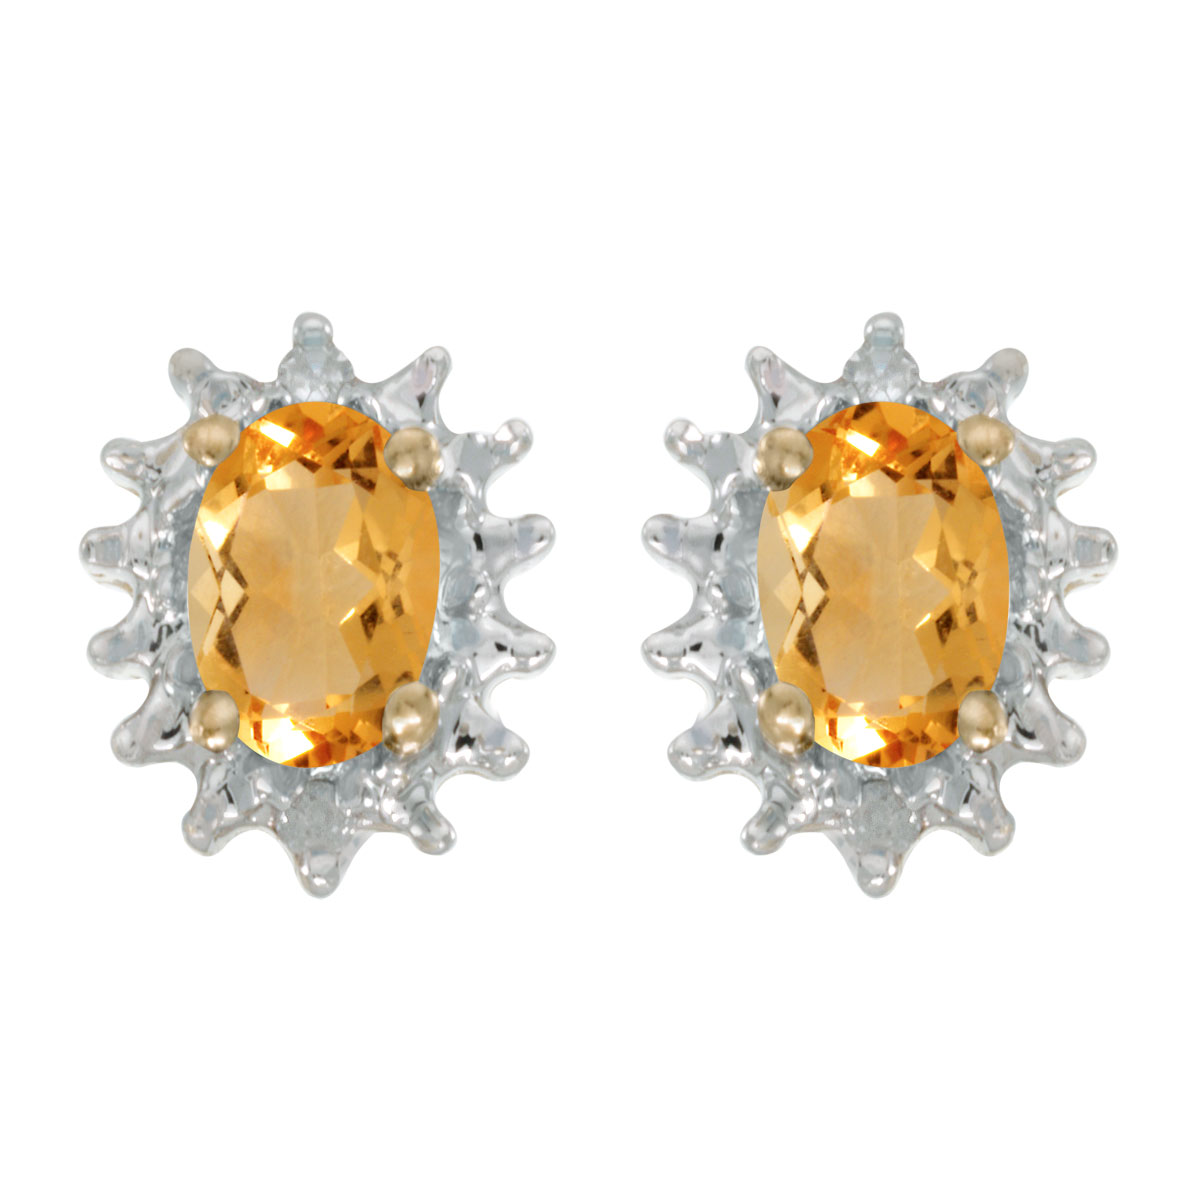 JCX1998: These 14k yellow gold oval citrine and diamond earrings feature 6x4 mm genuine natural citrines with a 0.62 ct total weight and .04 ct diamonds.